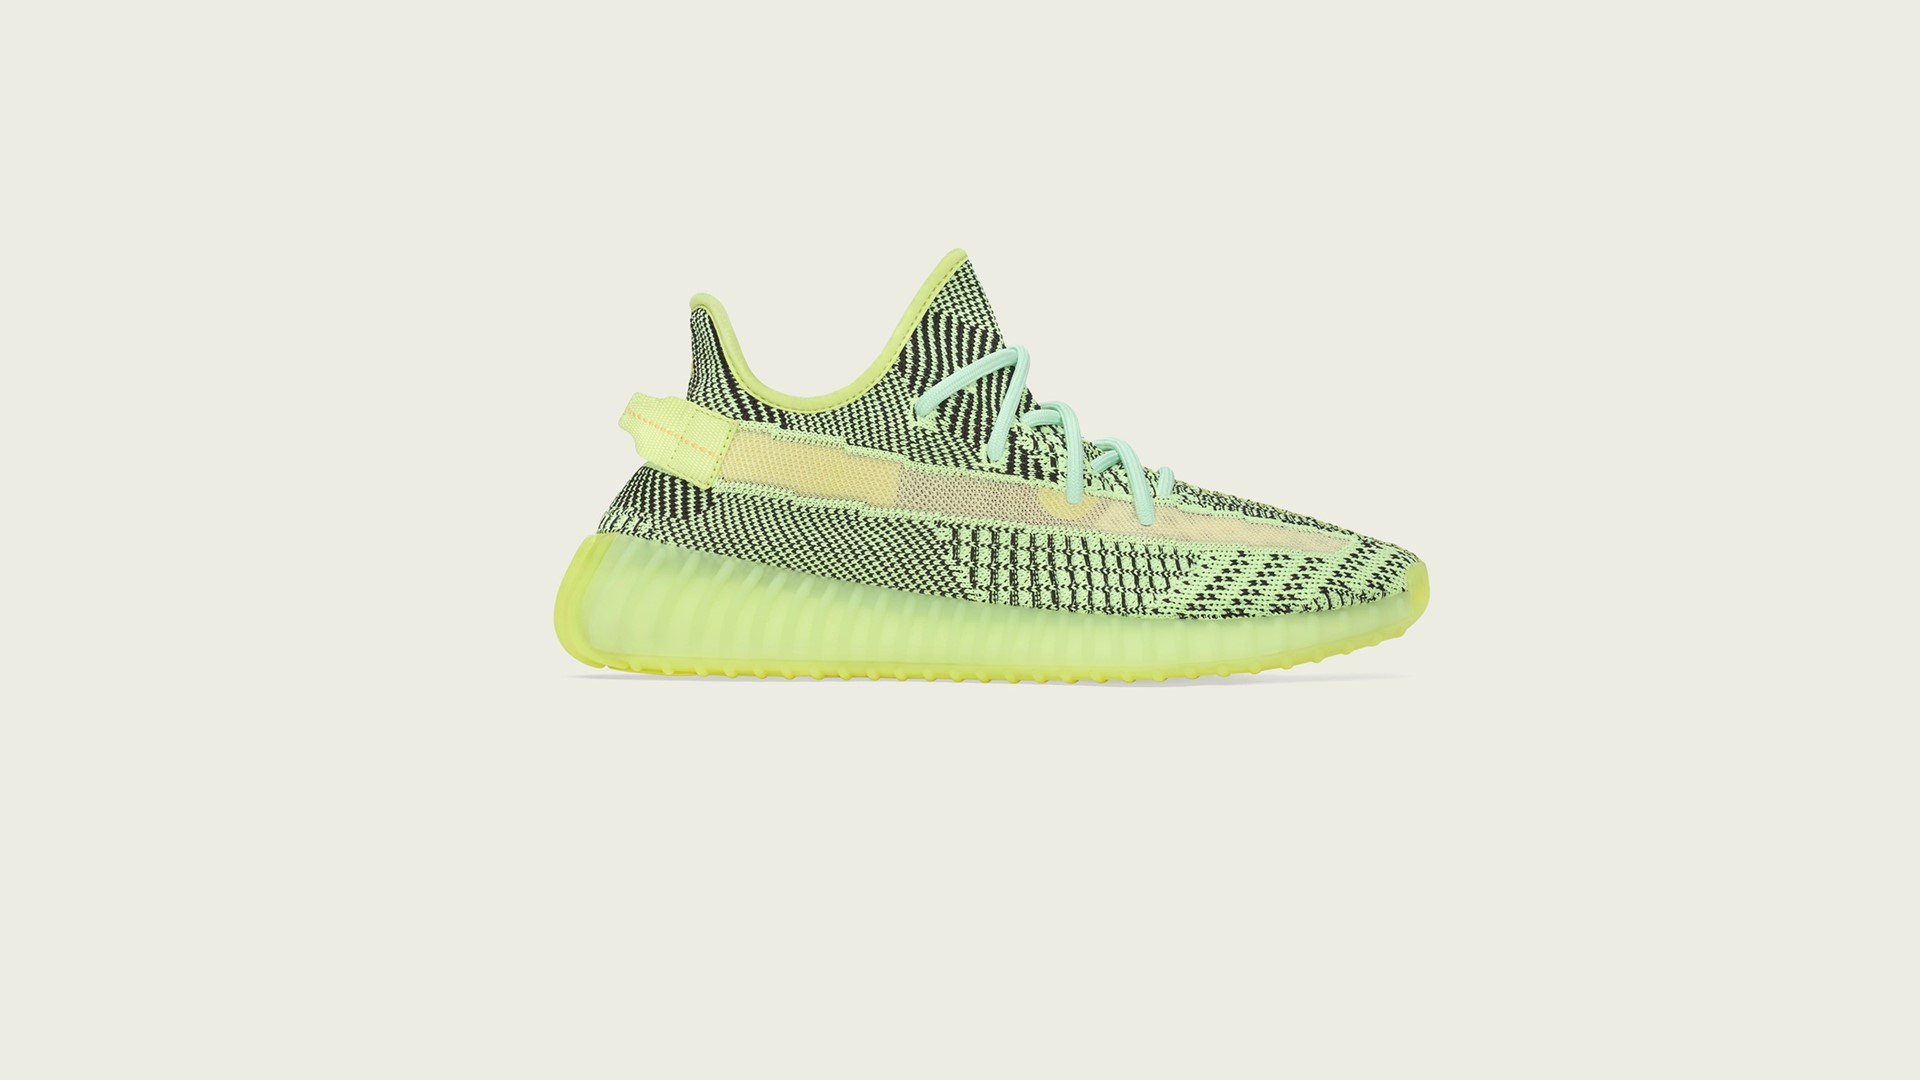 yeezy new shoes 2019